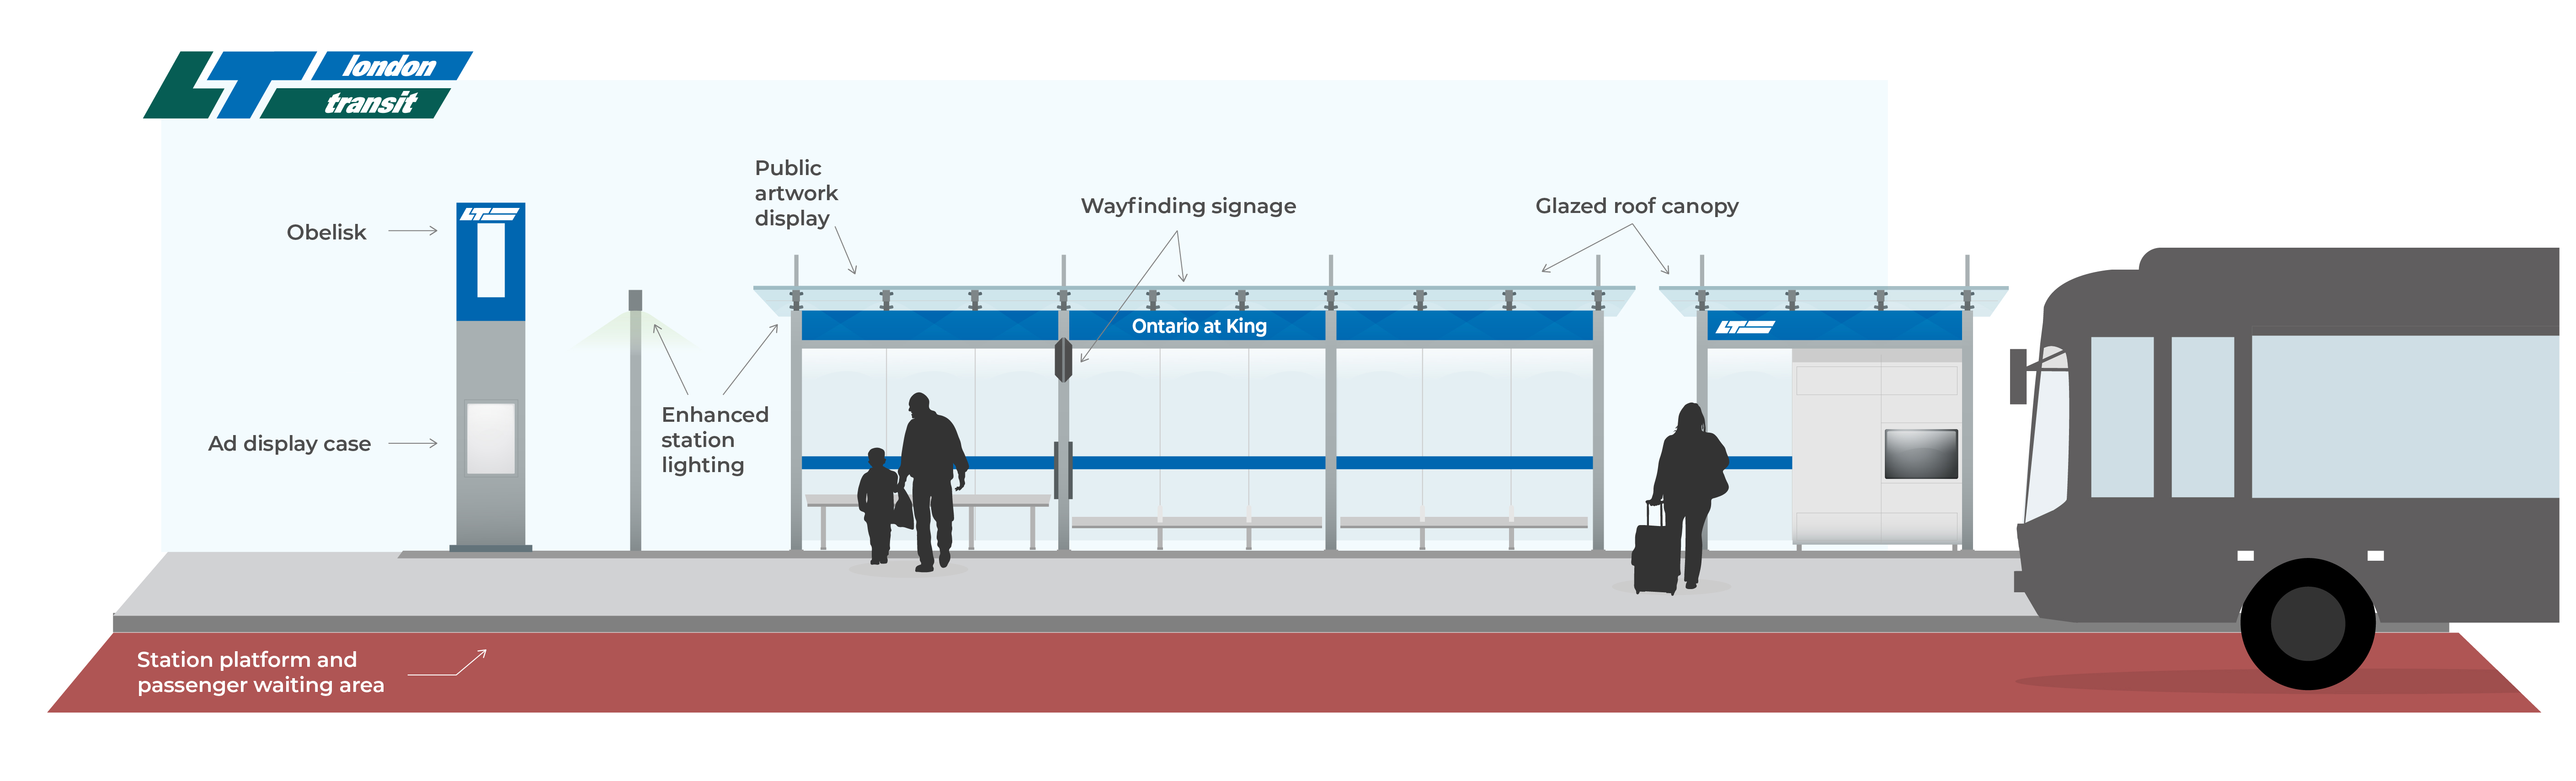 Conceptual graphic of the key features and amenities of rapid transit shelters.